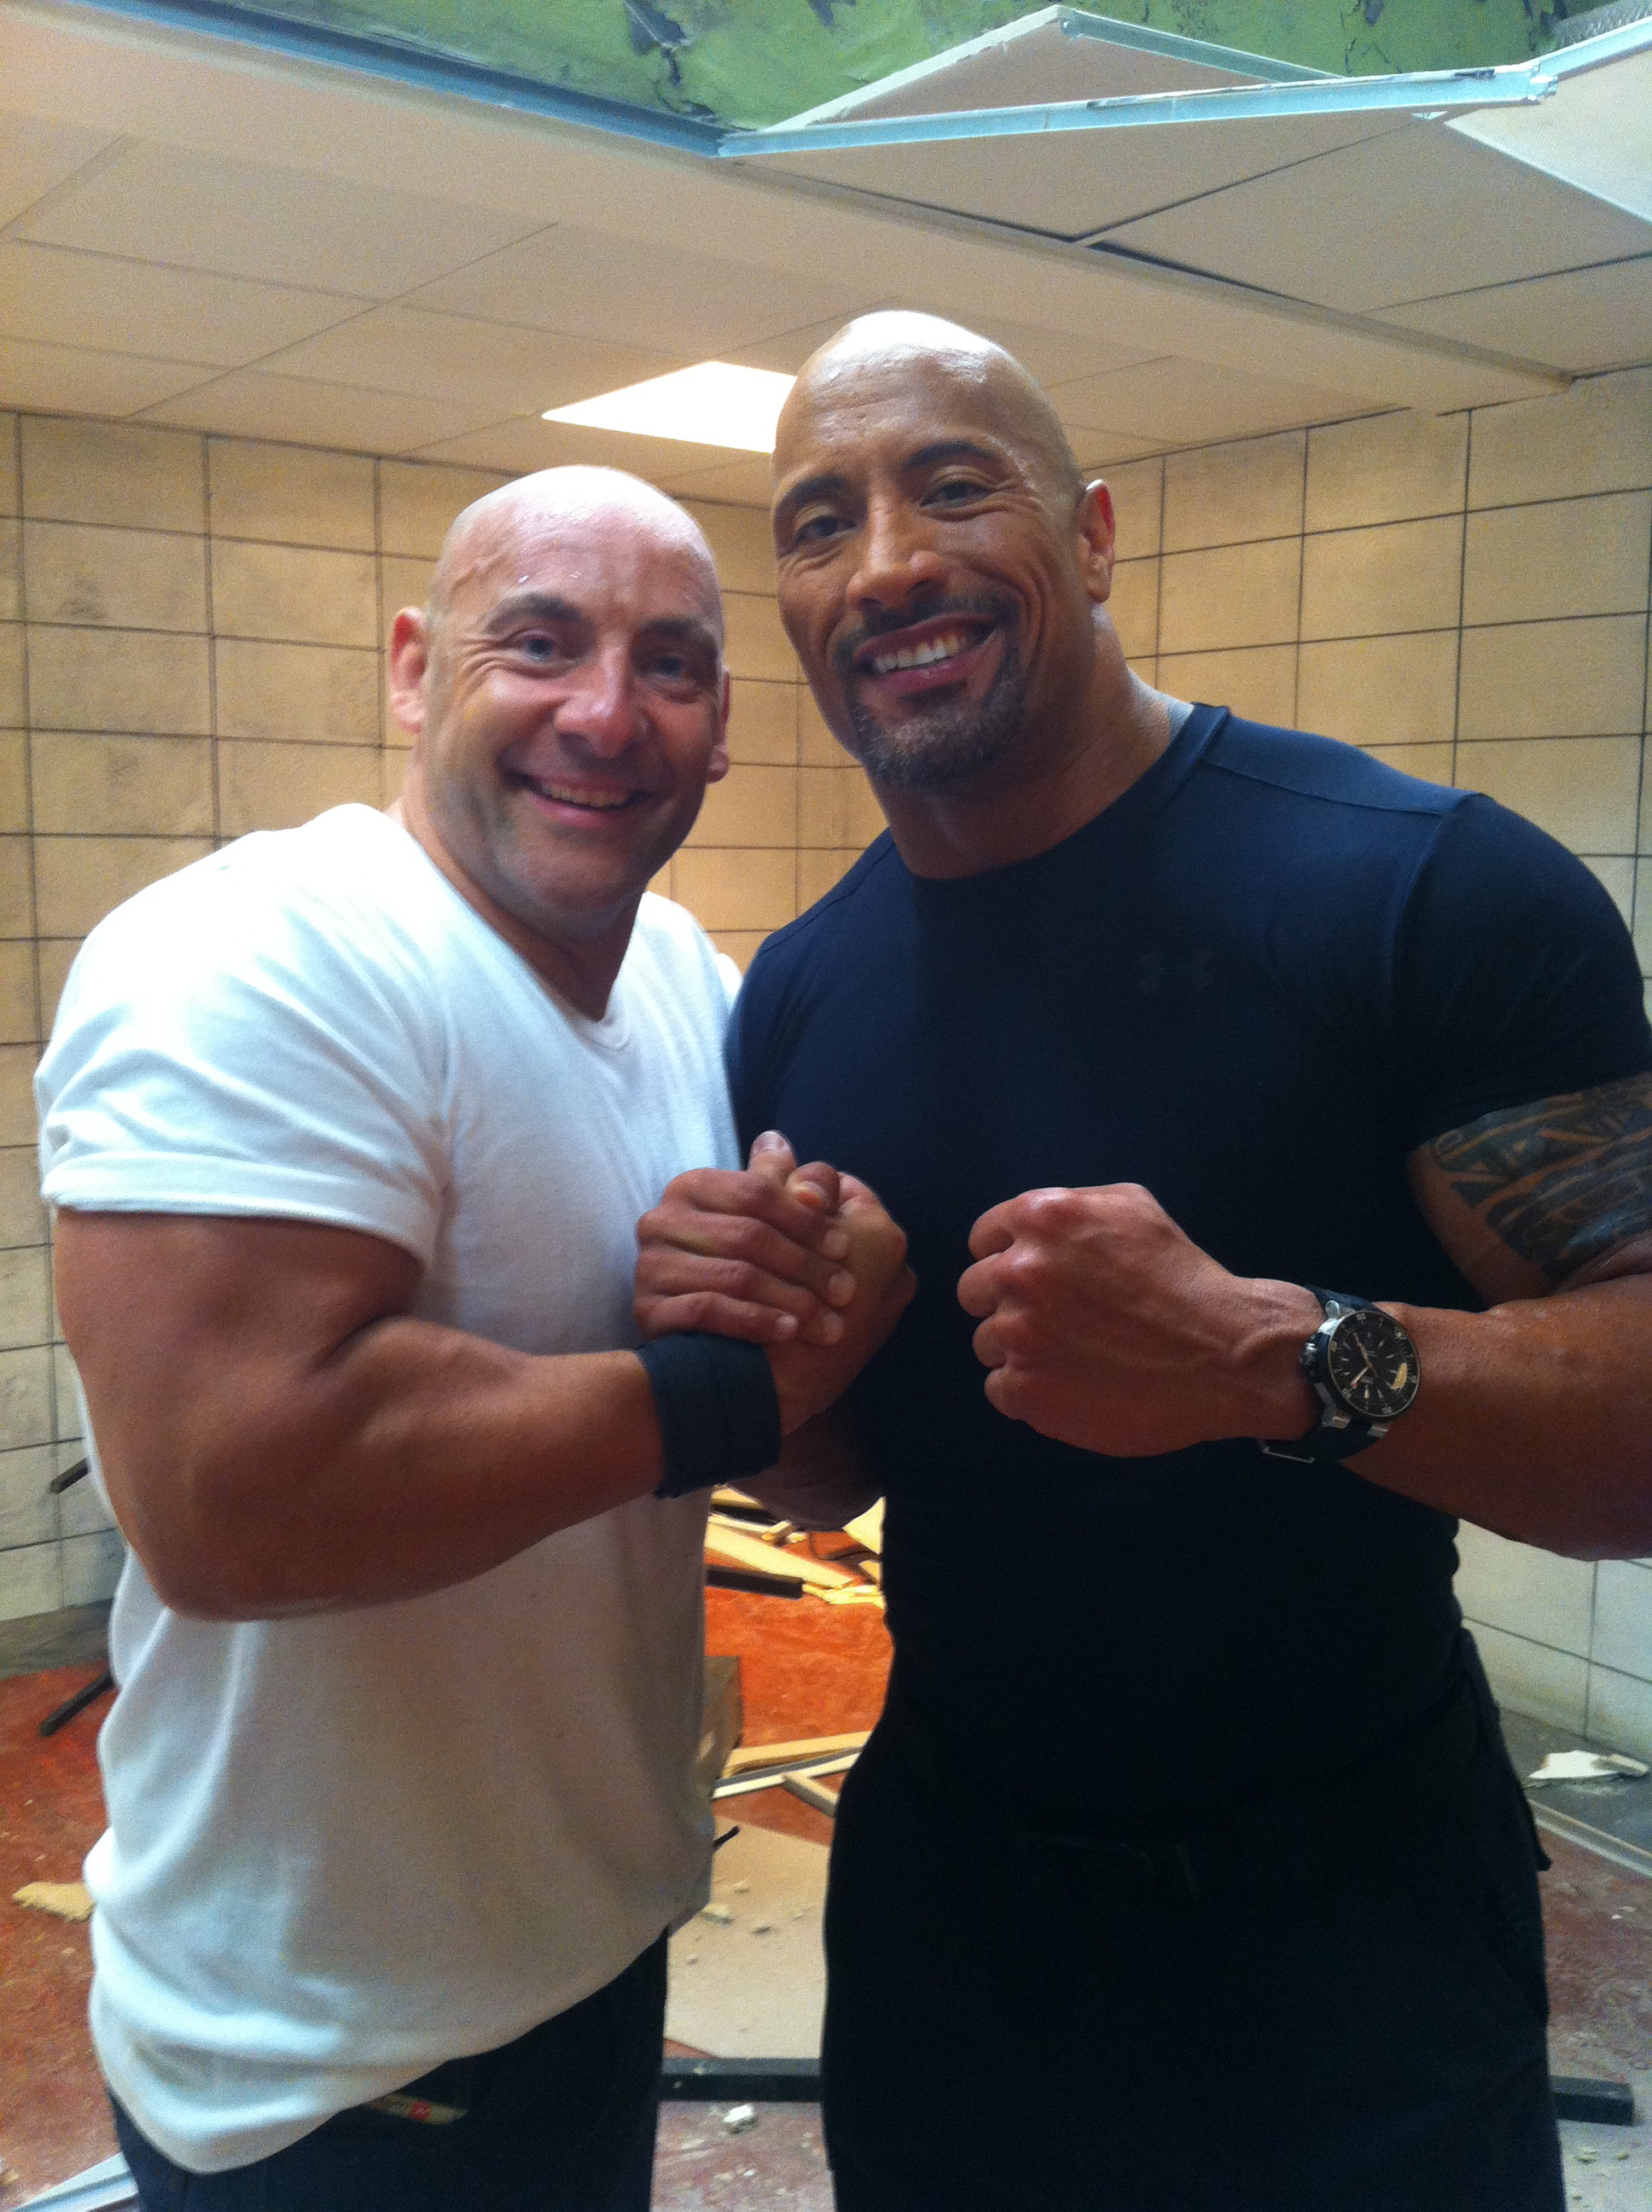 Me and the Rock on sweet of Fast 6.